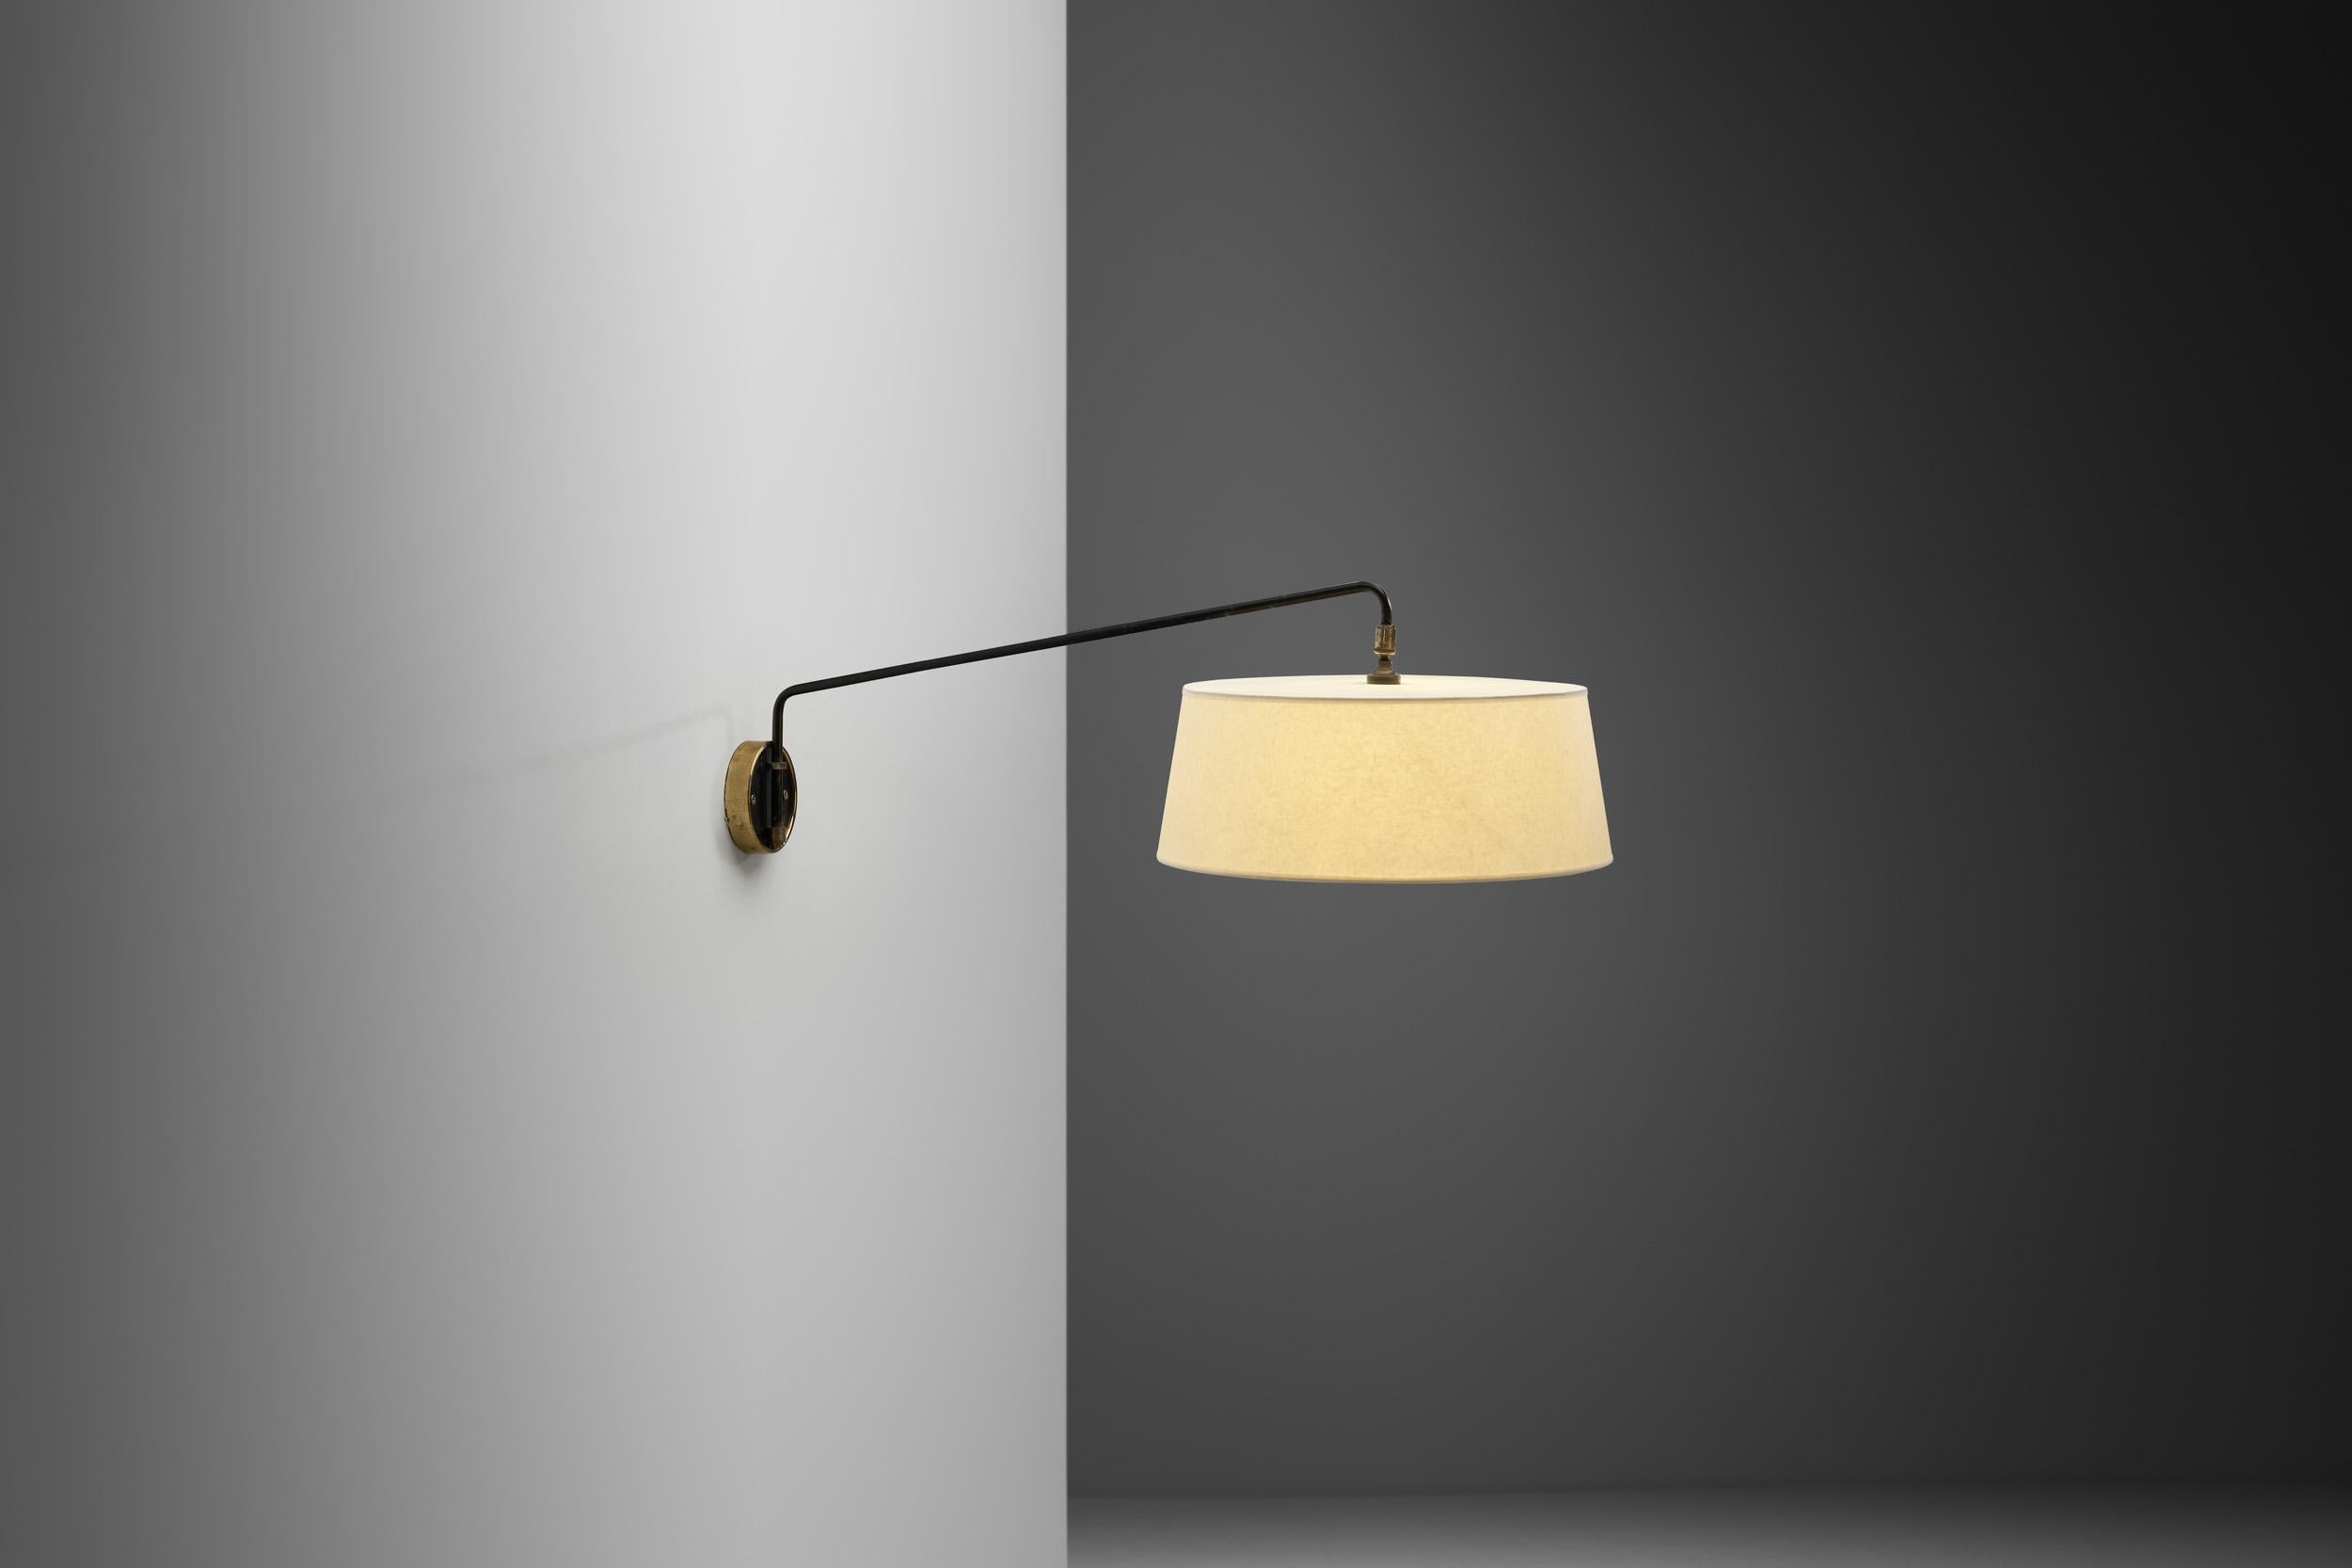 French mid-century designs were notable for their revolutionary approach to material, drawing upon industrial technology without compromising on aesthetic. Classic pieces - like this wall light - include works in lightweight, folded sheet metal